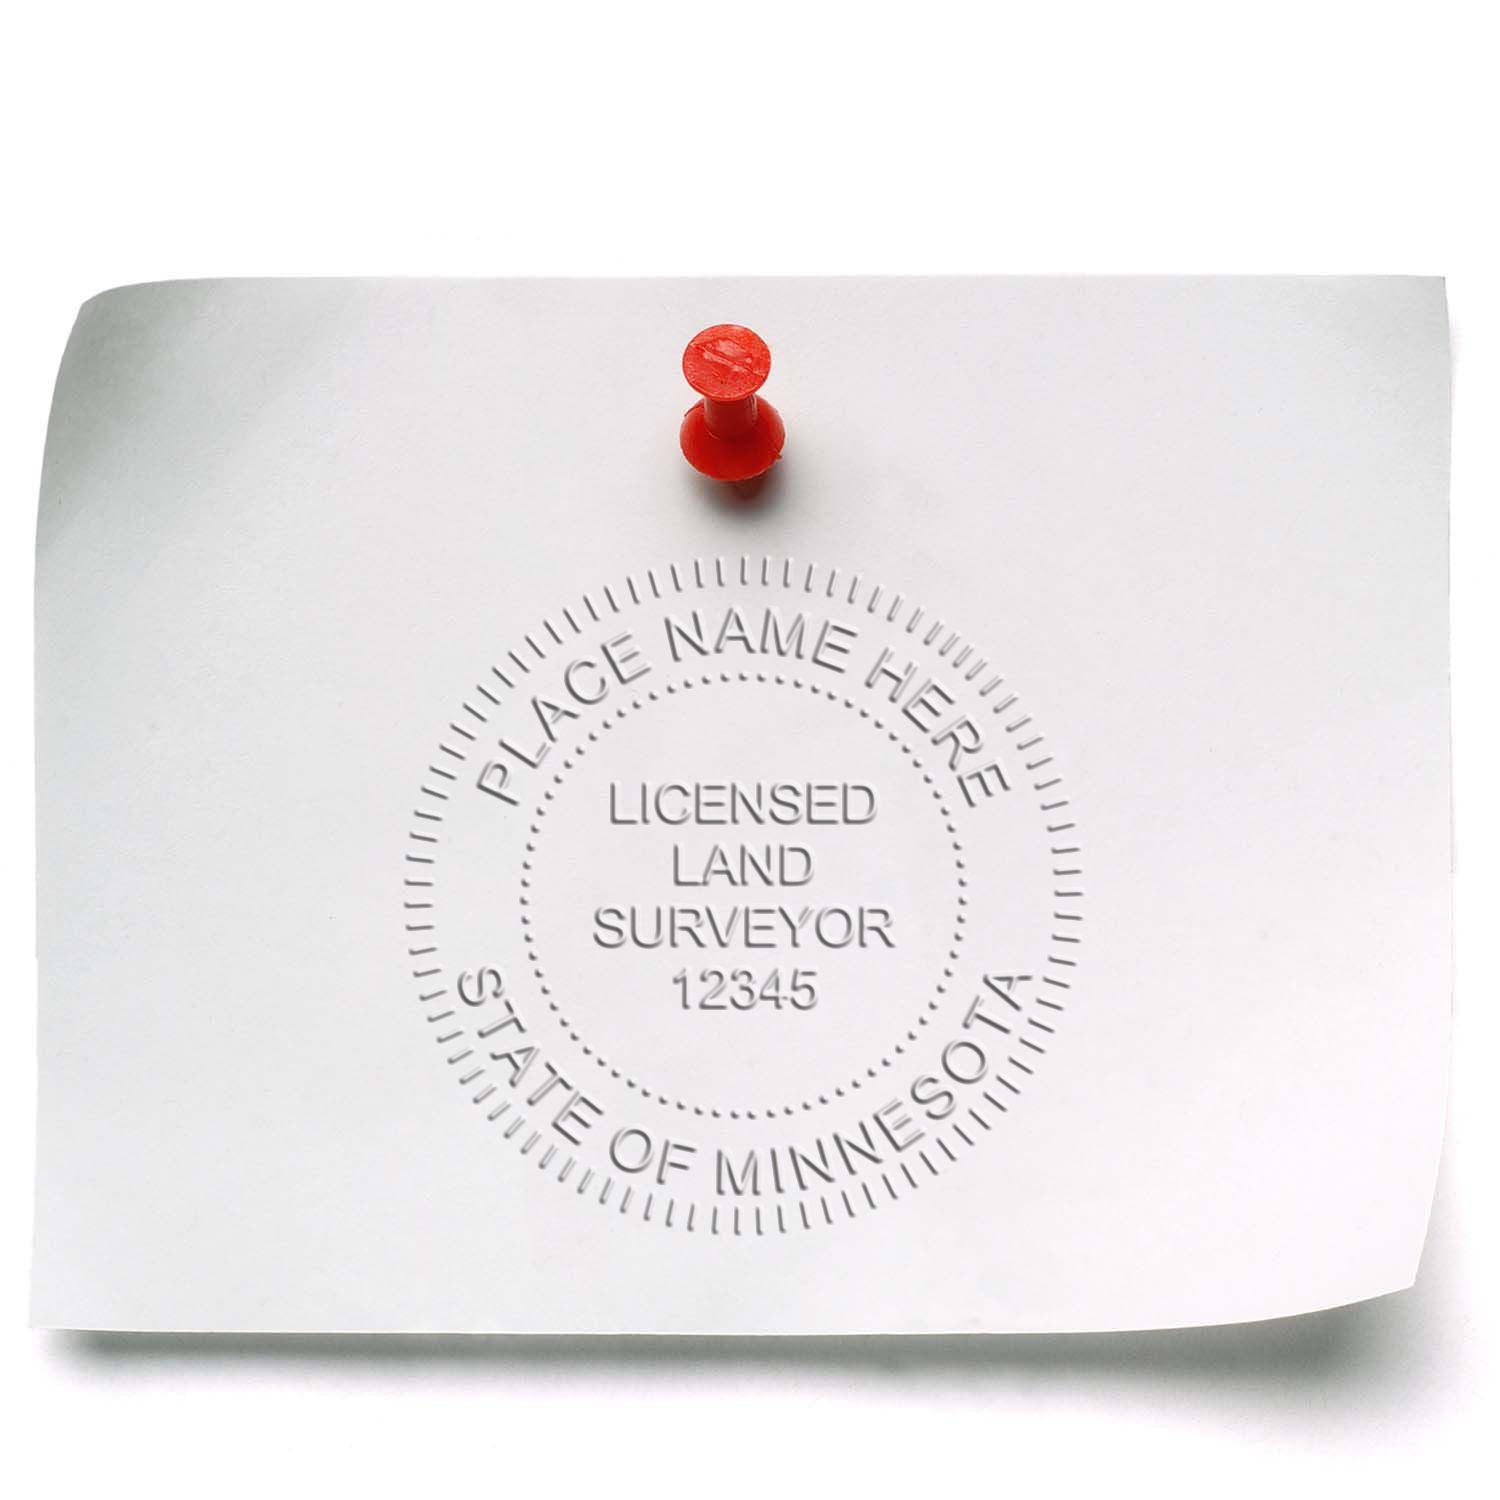 An alternative view of the Hybrid Minnesota Land Surveyor Seal stamped on a sheet of paper showing the image in use